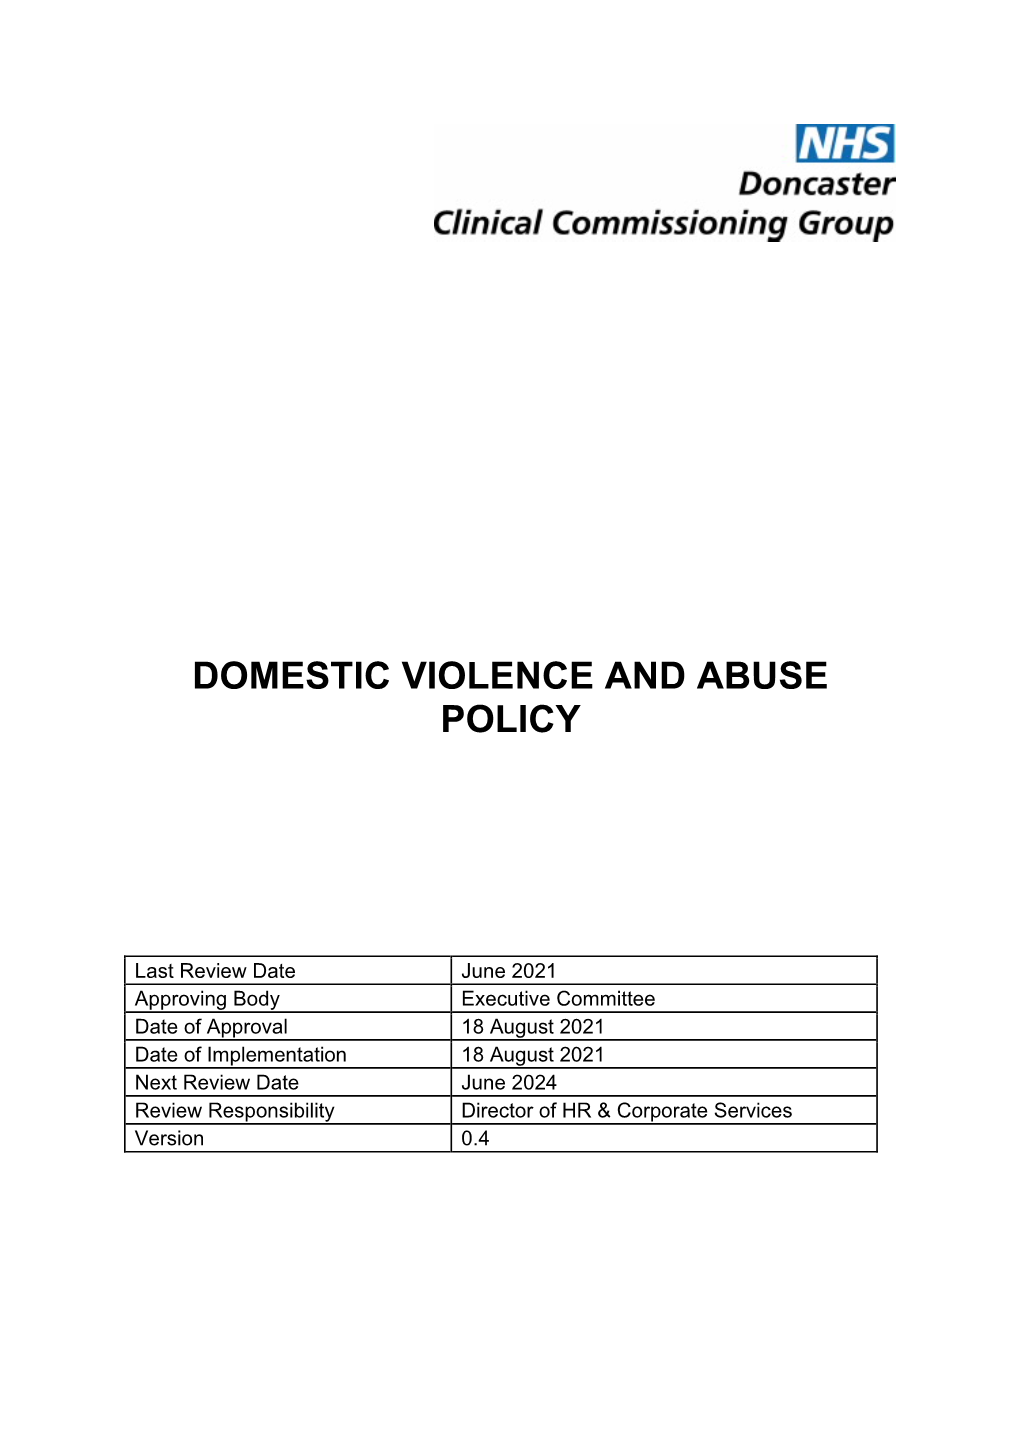 Domestic Violence and Abuse Policy